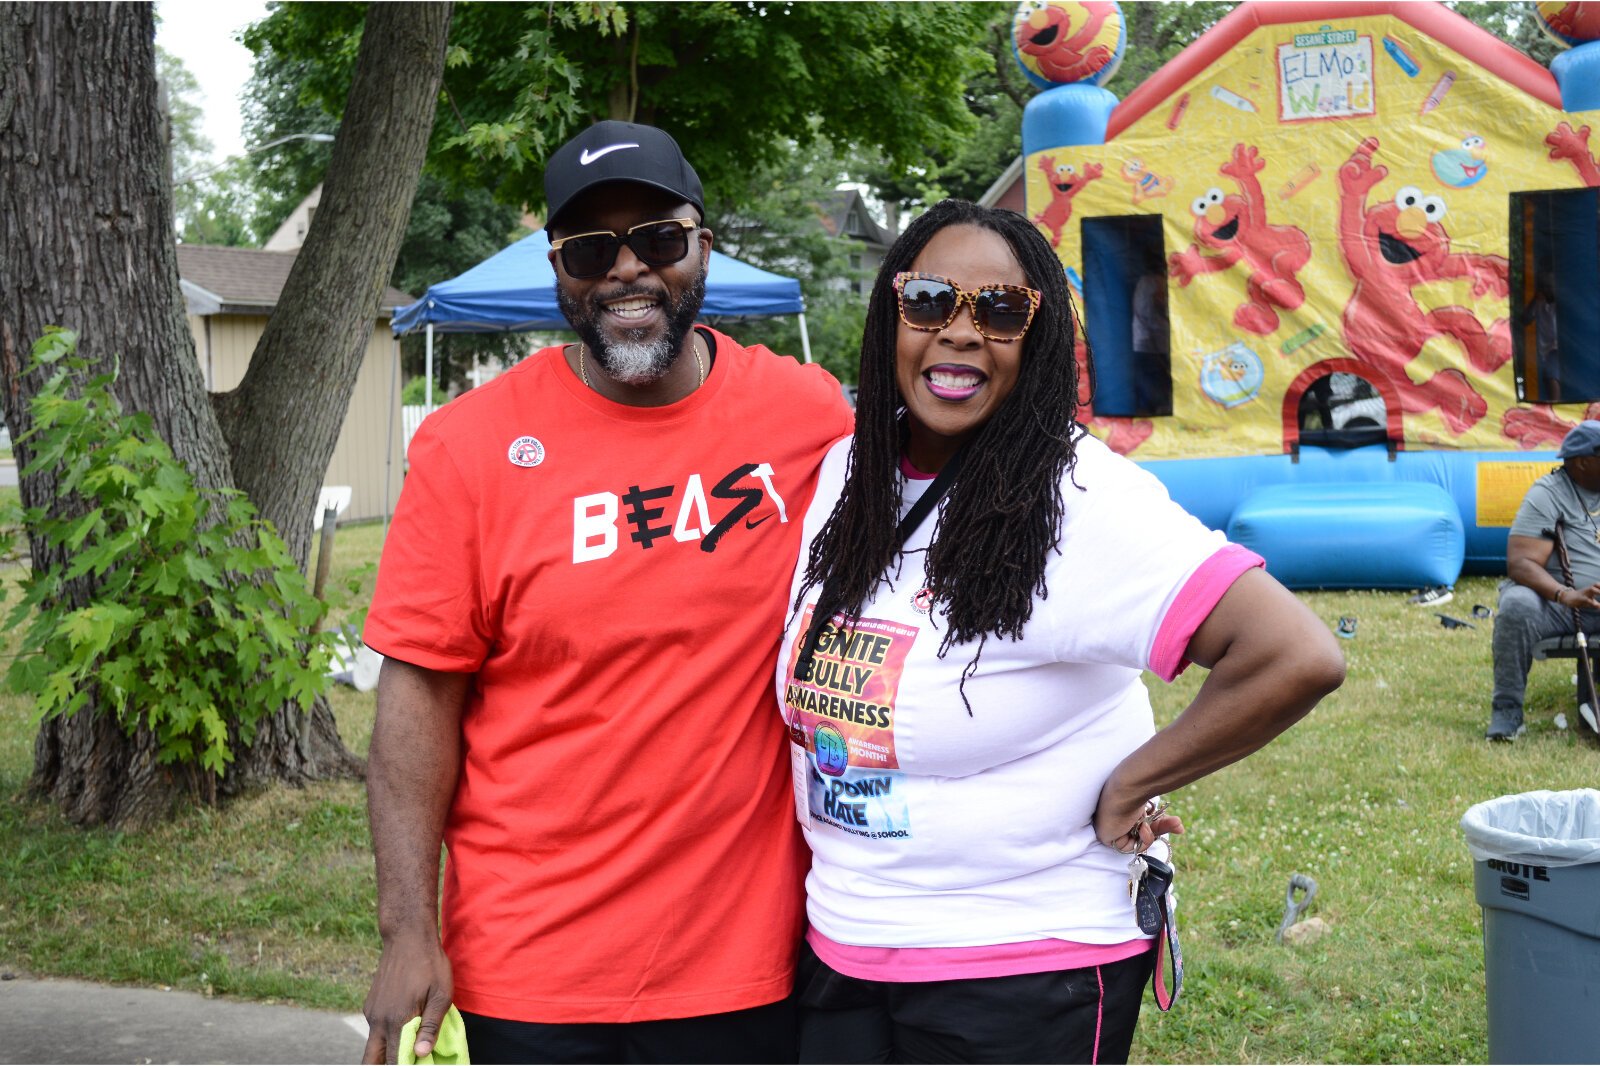  H.O.P.E.'s Recovery and Resiliency Trauma Center Director Reggie Nelson, and recovery navigation coordinator Mighty Stream, were enjoying the block party and mingling with whoever needed to speak with them.